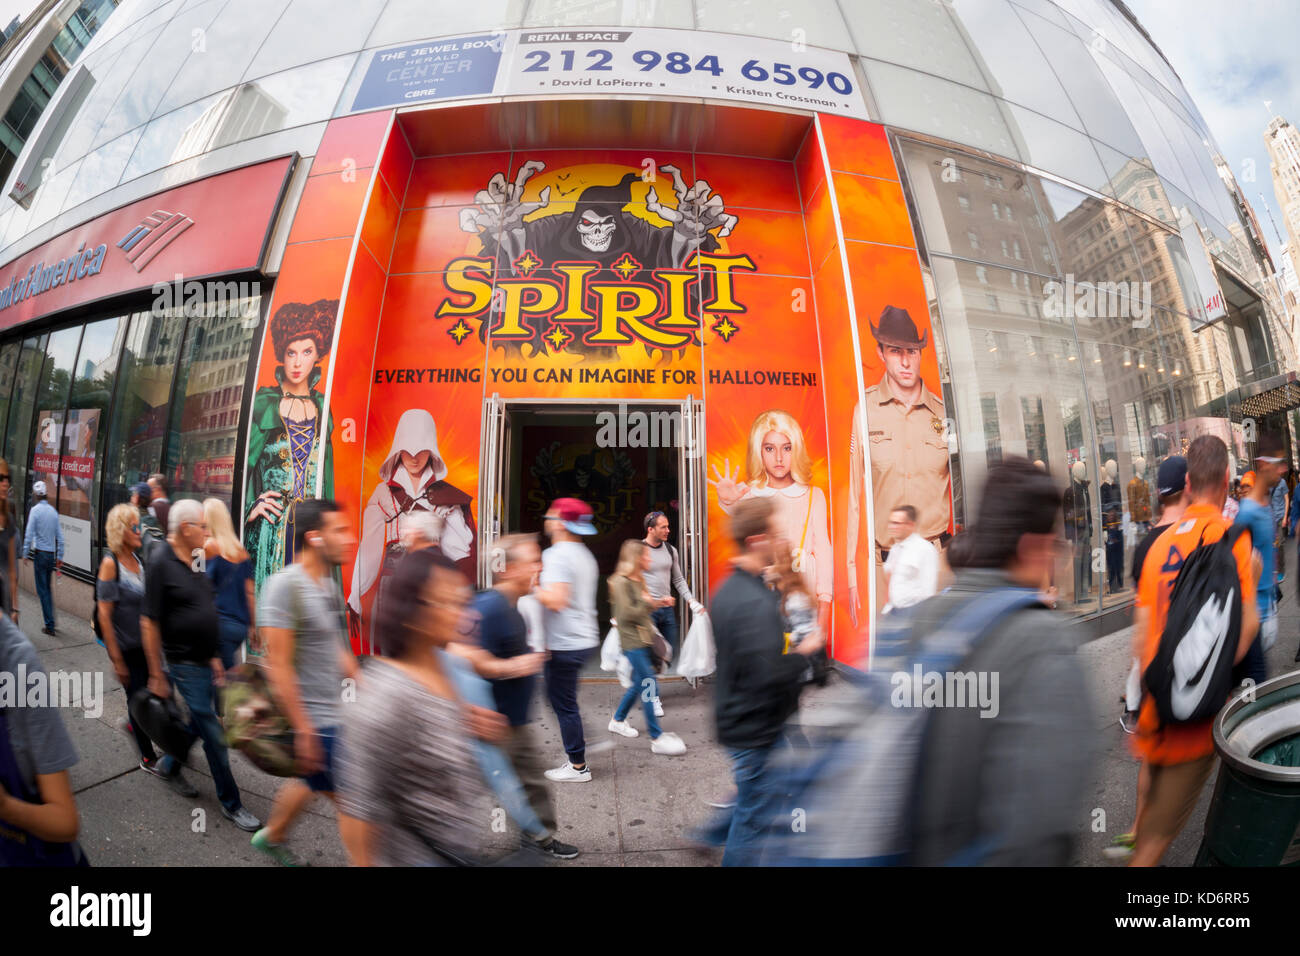 A Spirit Halloween pop-up store in New York on Thursday, October 5, 2017. Spirit will have 1300 pop-up locations in North America this year, many of which will be in locations formerly occupied by distressed retailers. Halloween spending is expected to hit $9.1 billion this year. (© Richard B. Levine) Stock Photo